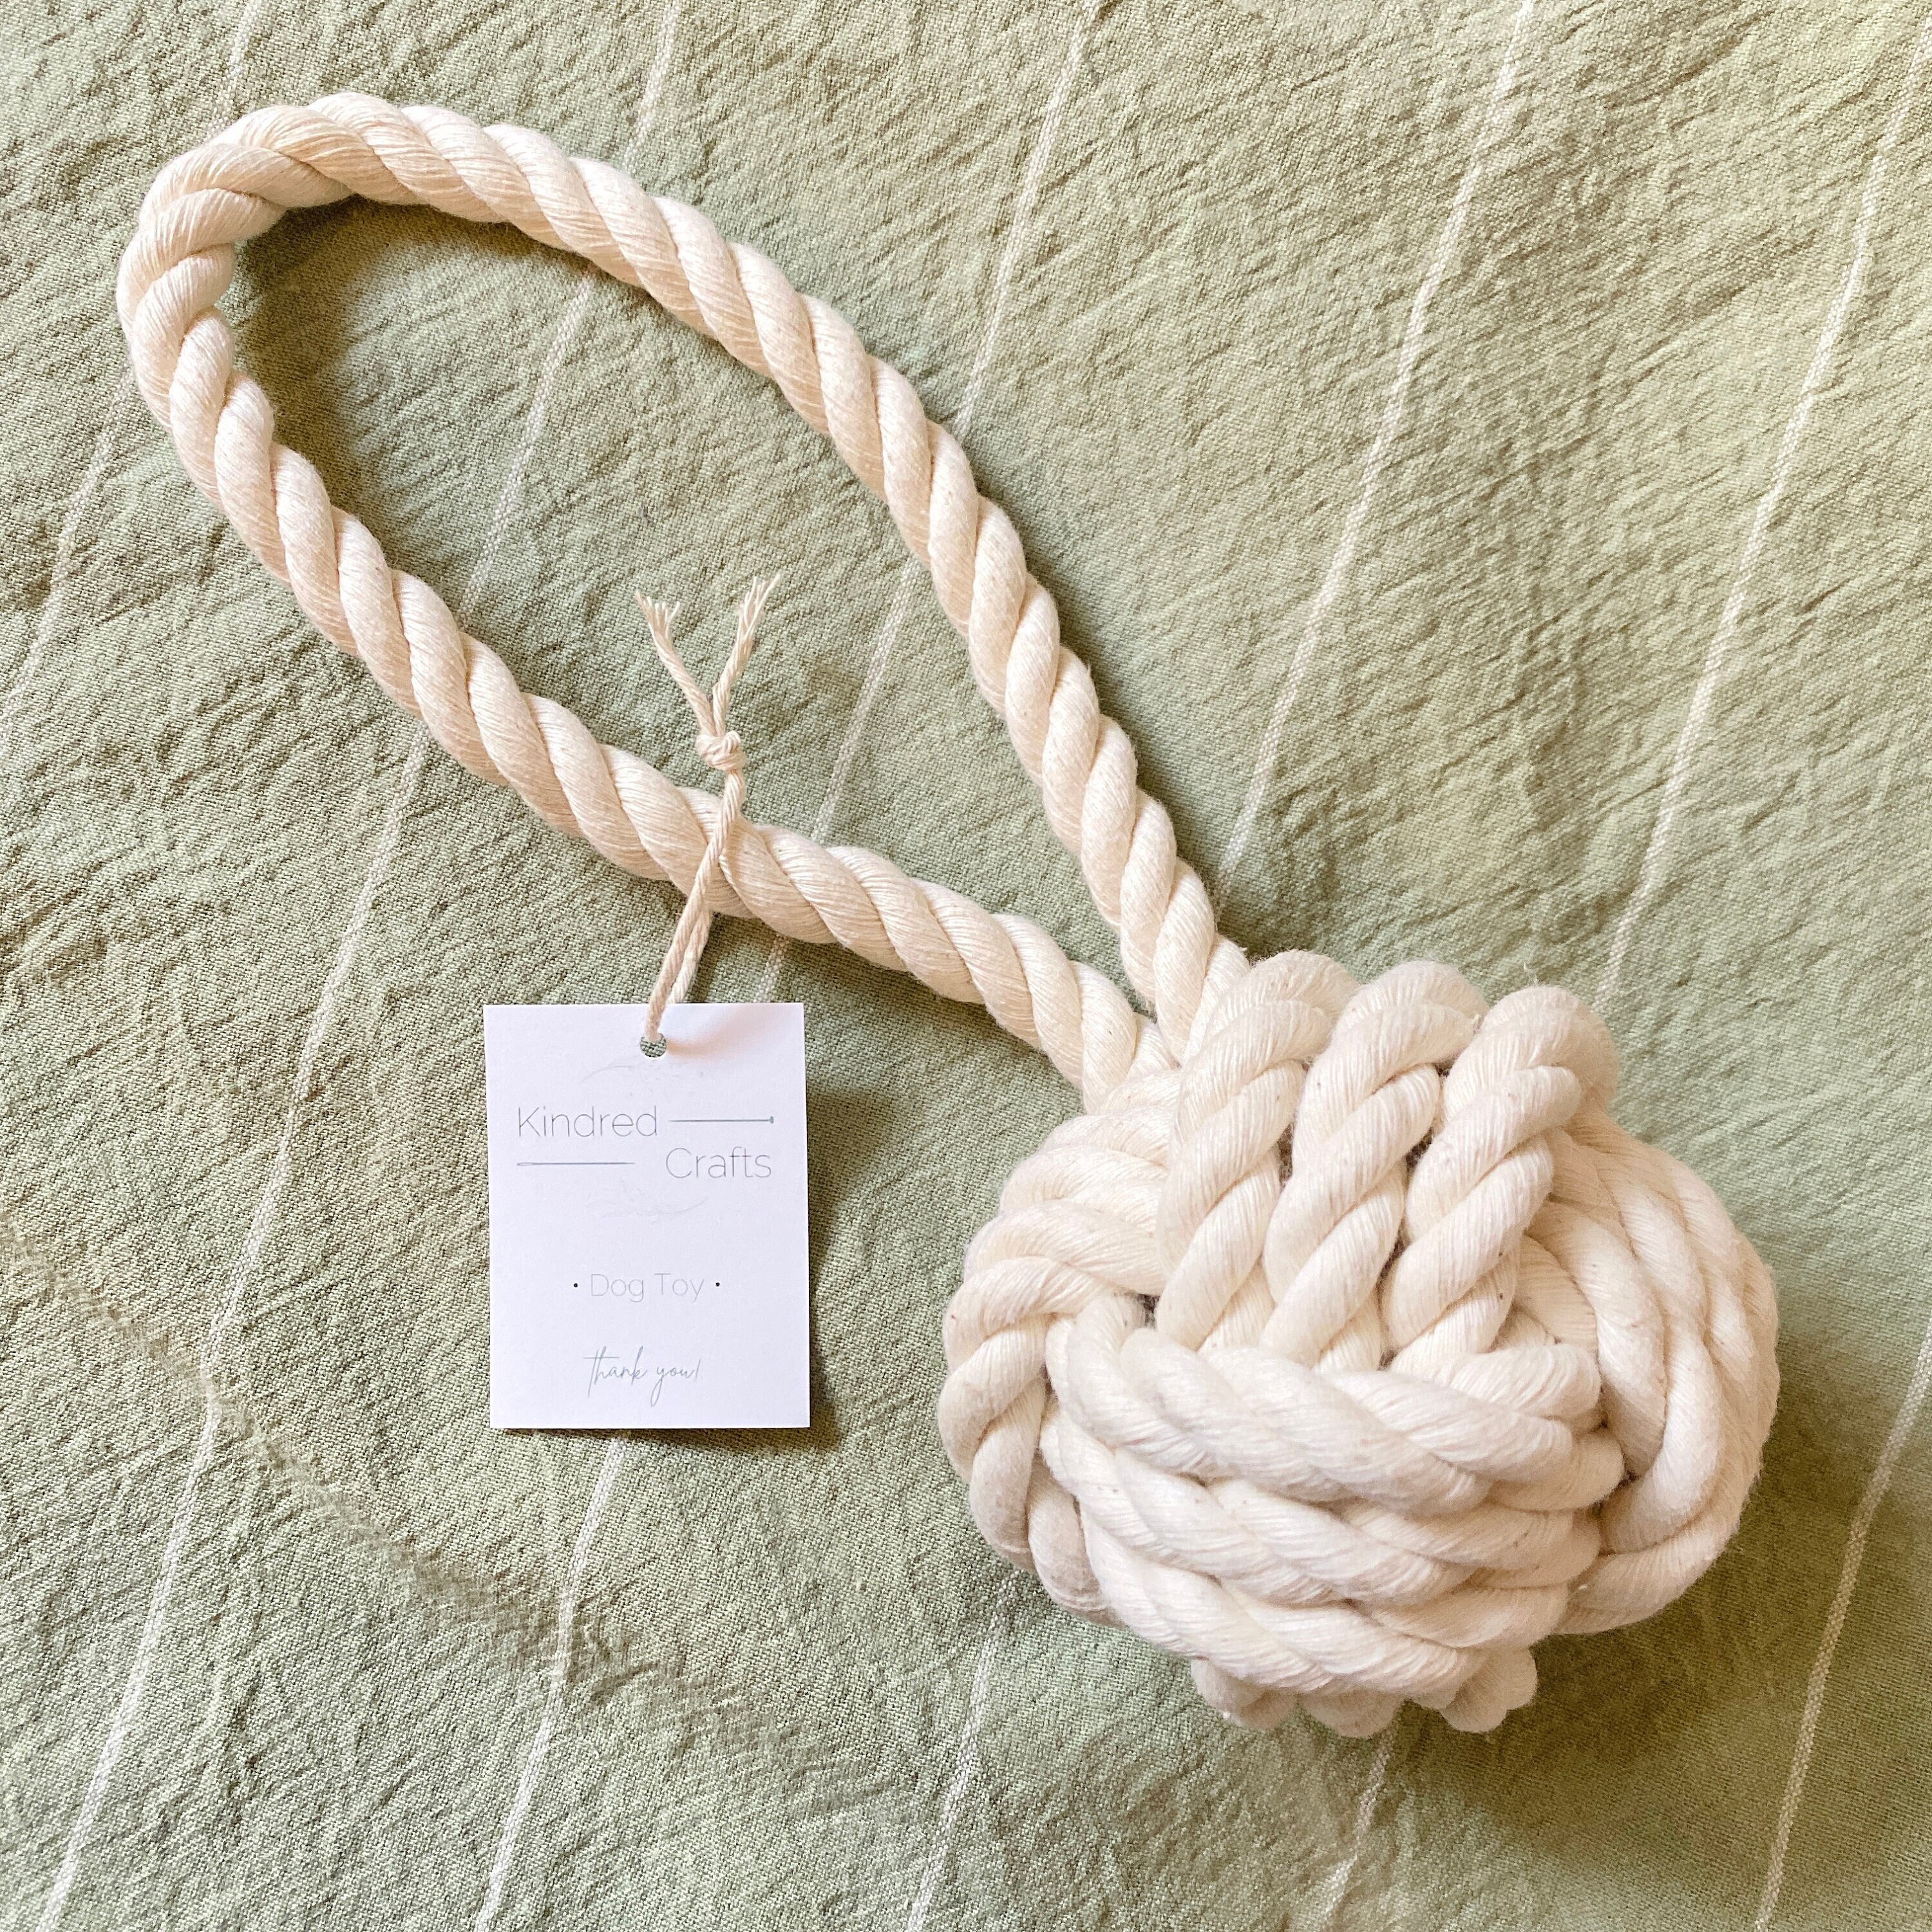 Dog Fetch Toy from Natural Homespun Cotton Rope for Outdoor Fun